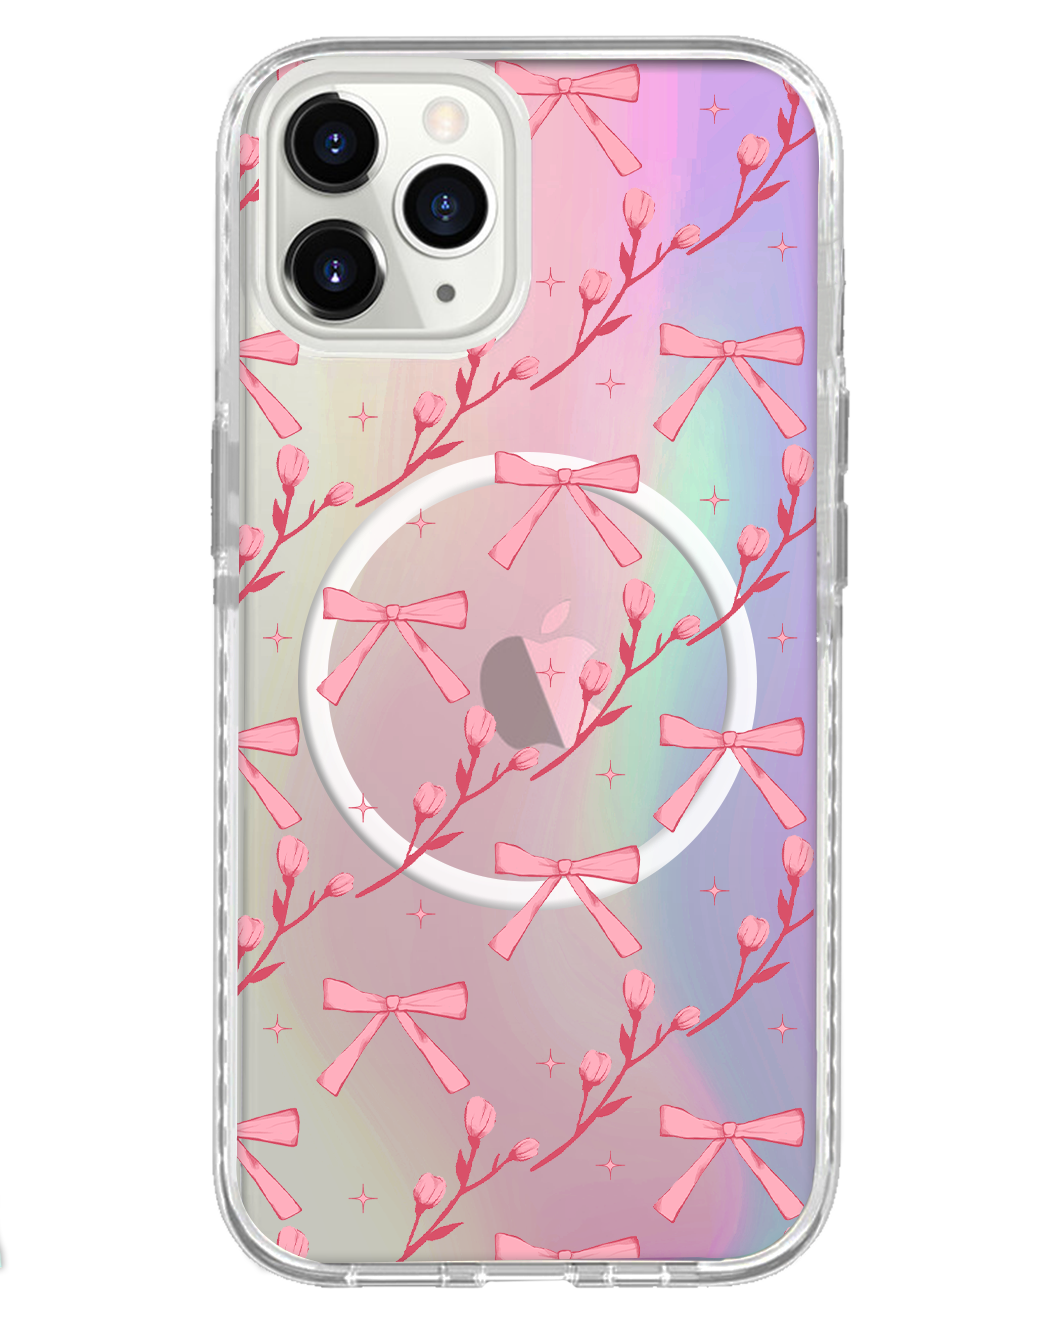 iPhone Rearguard Holo - Coquette Floral